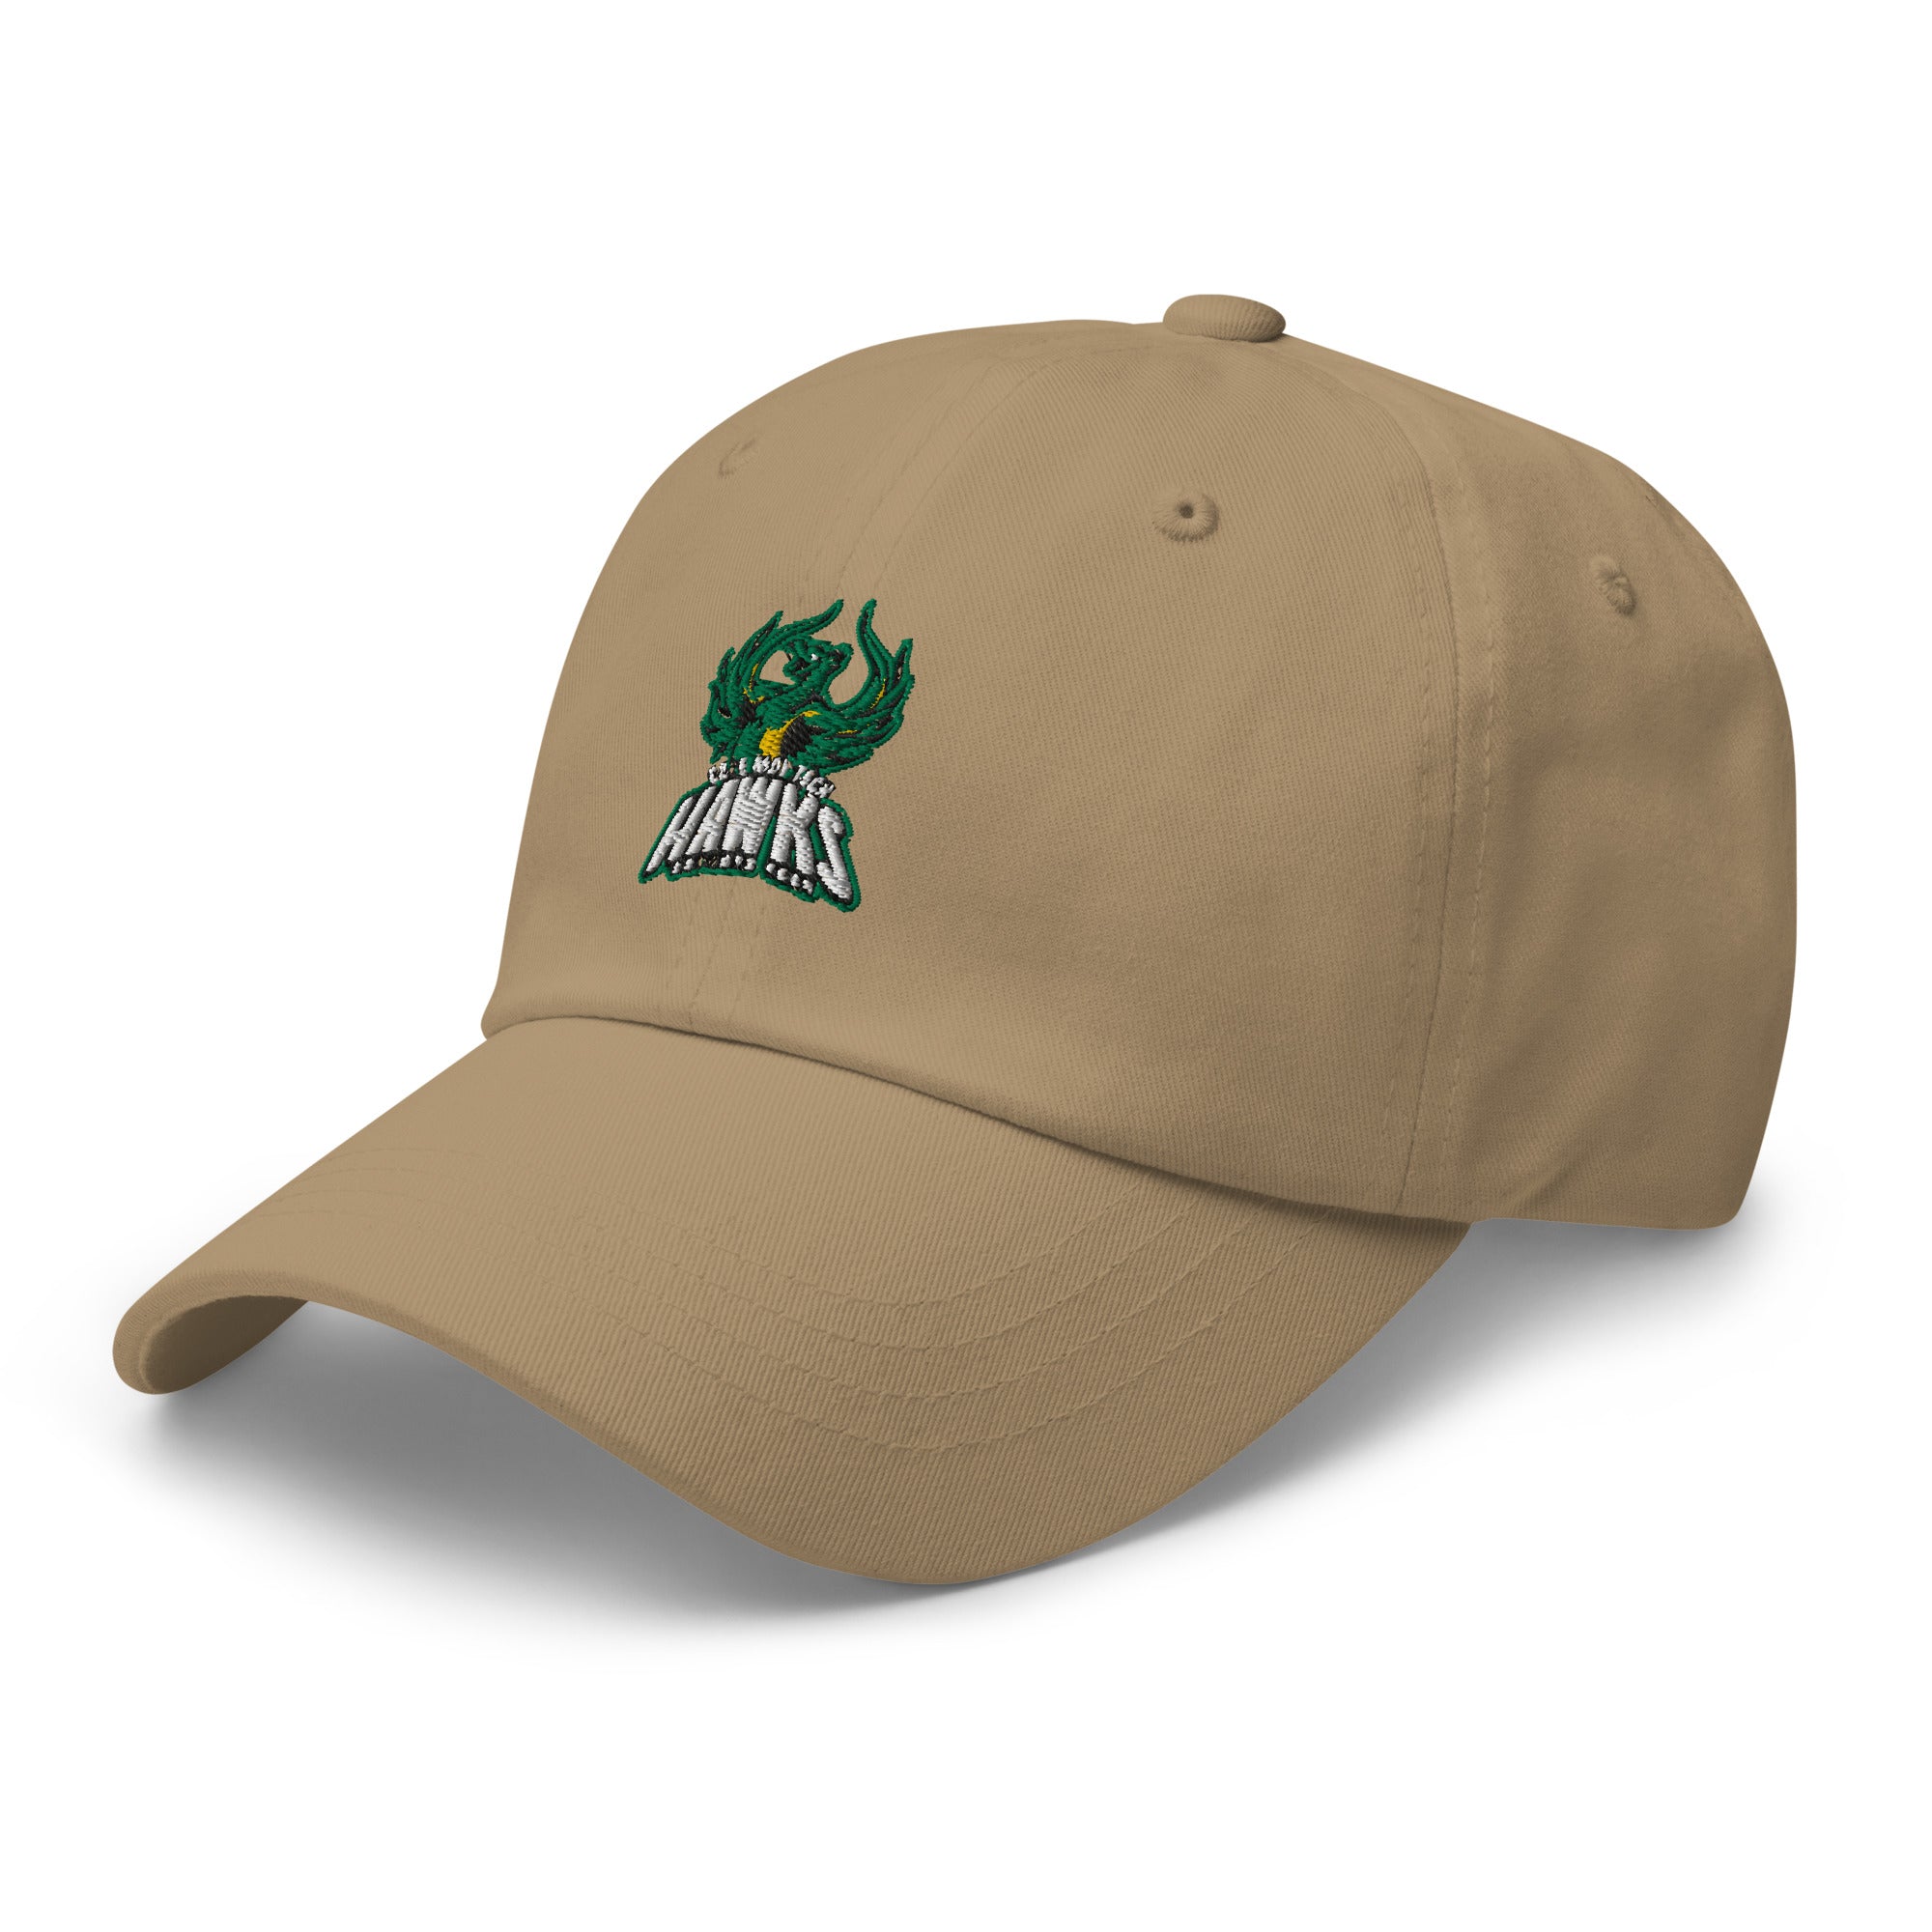 Cape May Technical | On Demand | Embroidered Dad Hat